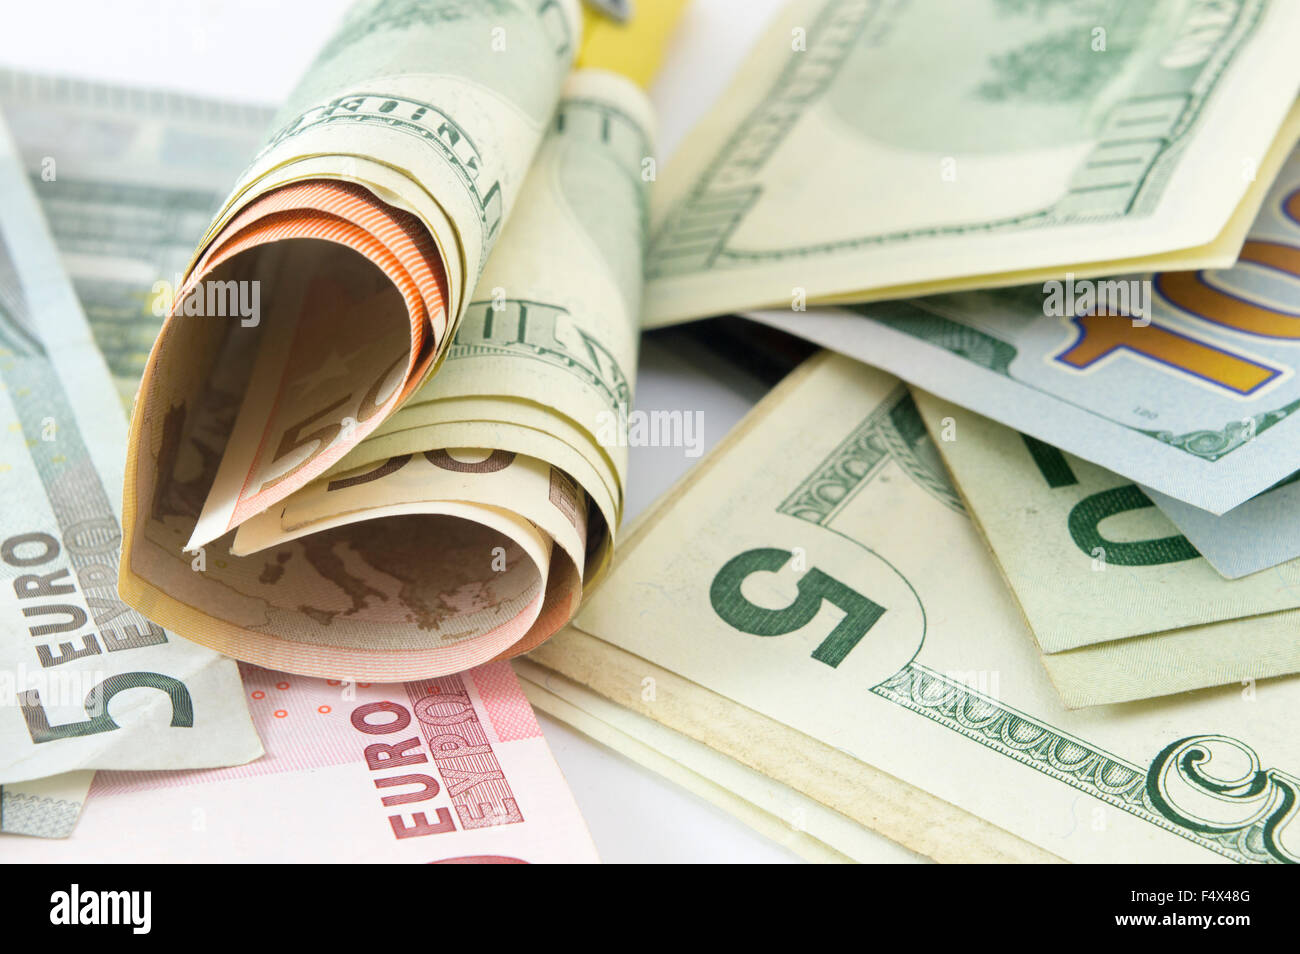 Bunch of dollar bills on the table forming a heart shape Stock Photo